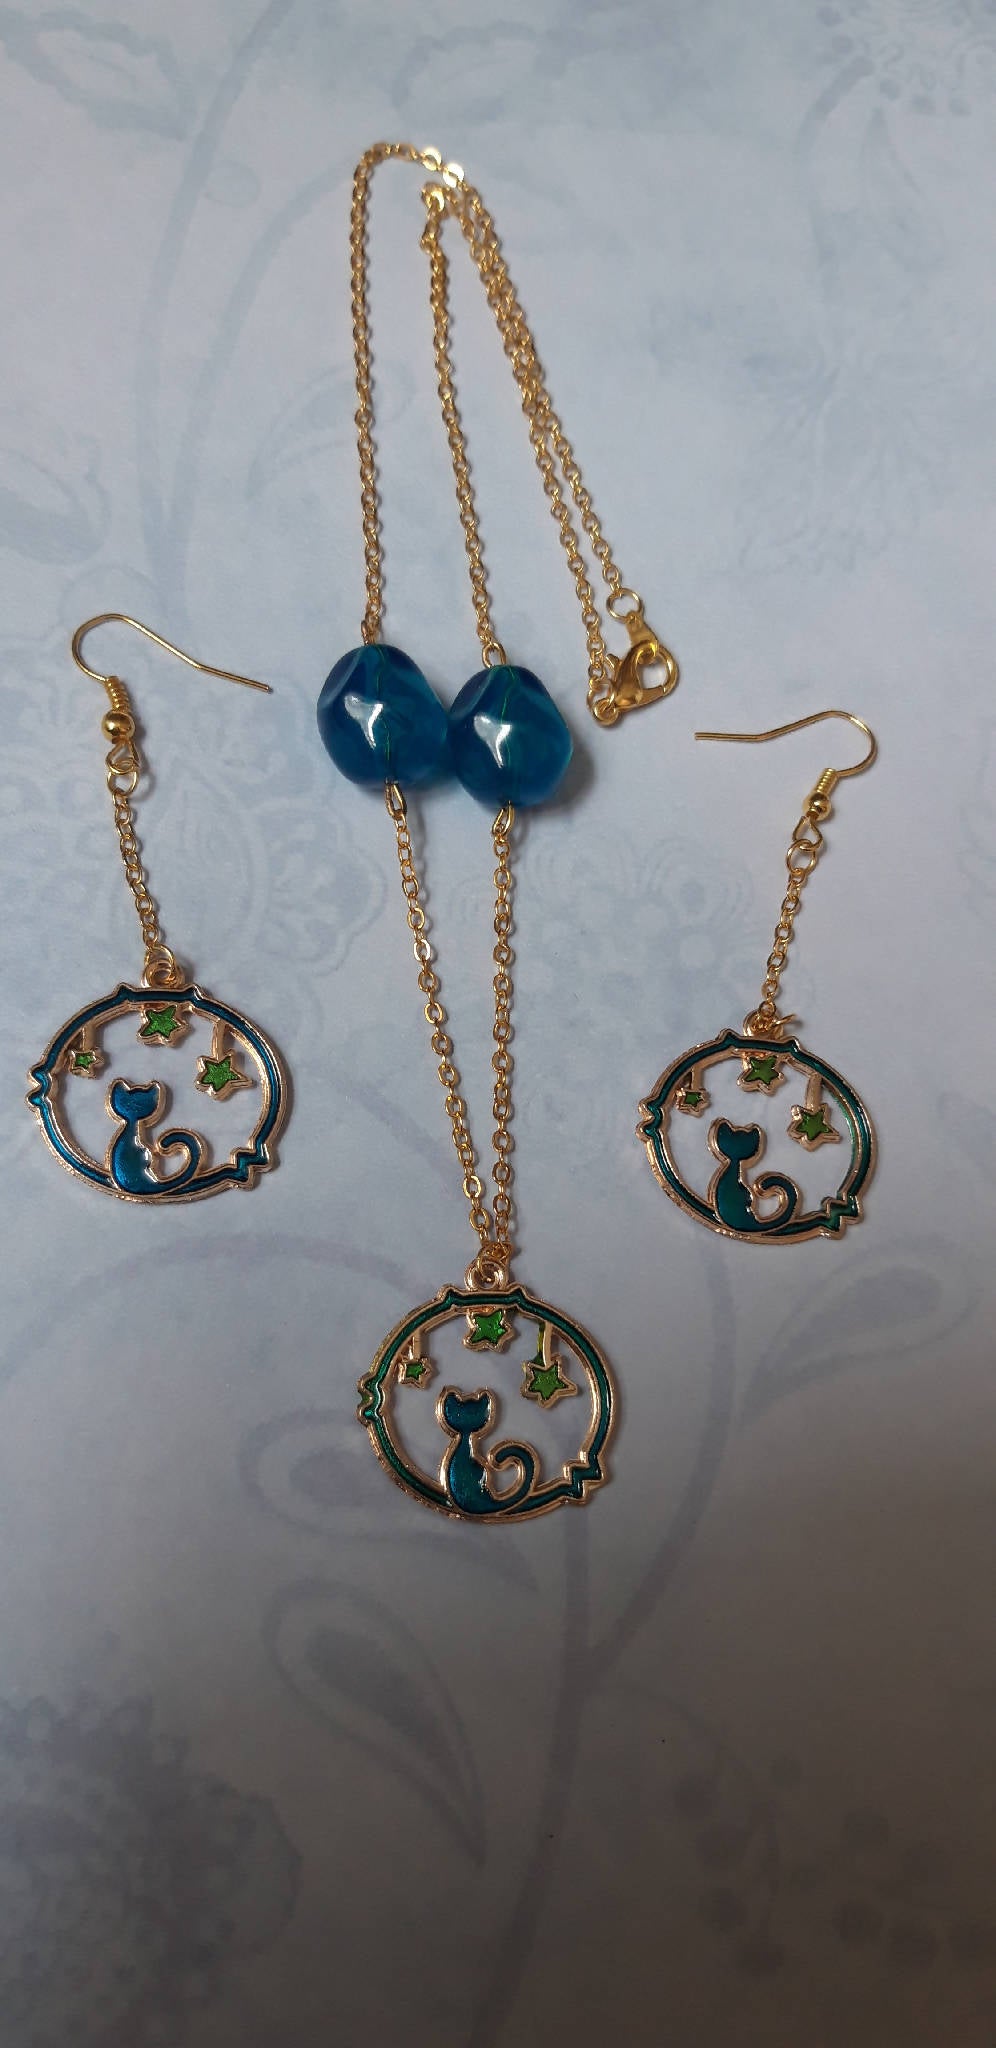 Mystic cats necklace and earring set